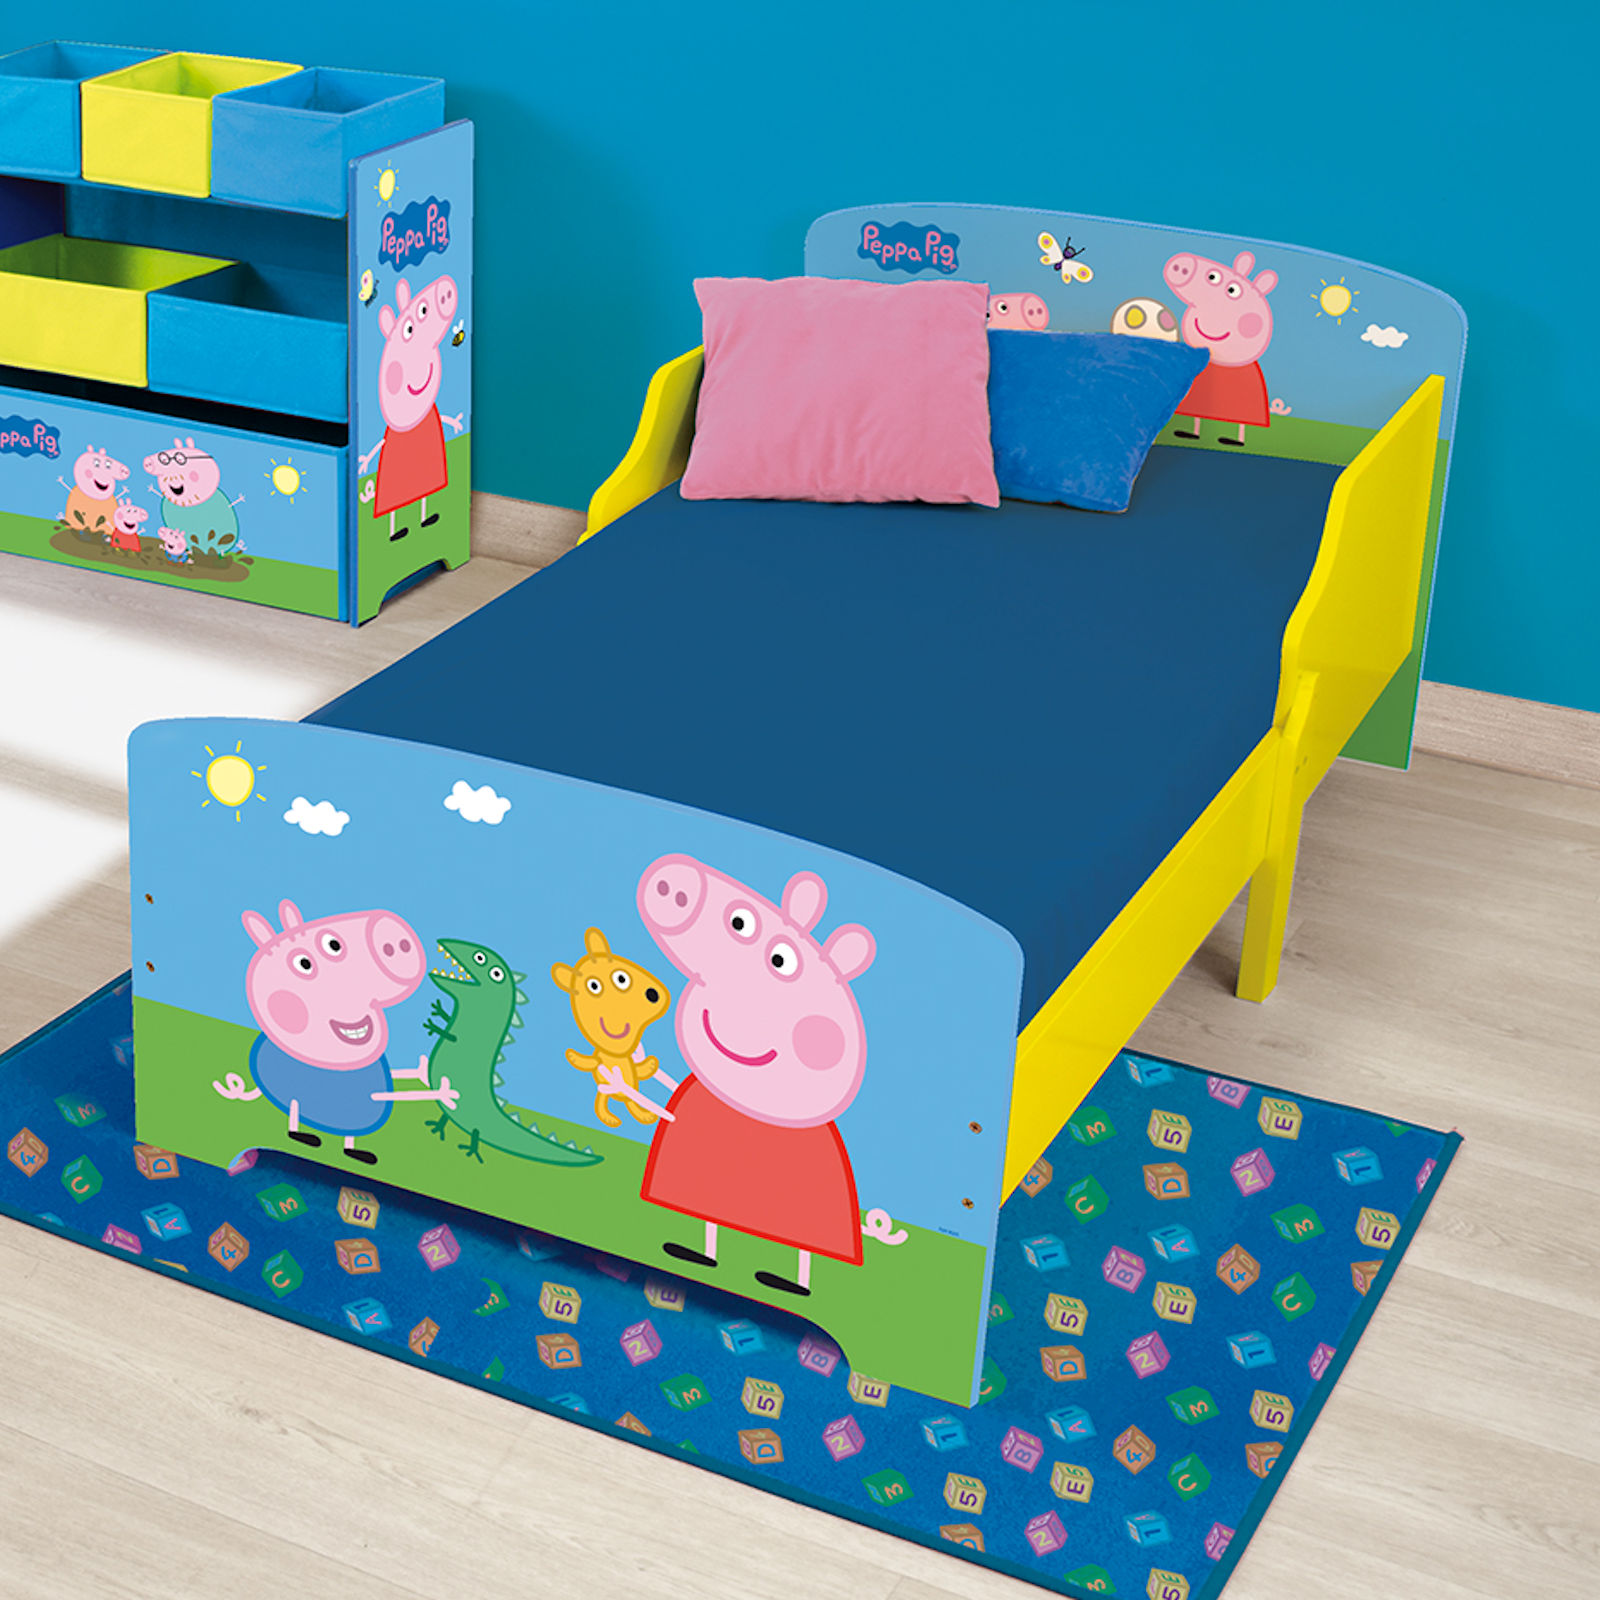 Peppa Pig Wooden Junior Toddler Bed – Yellow